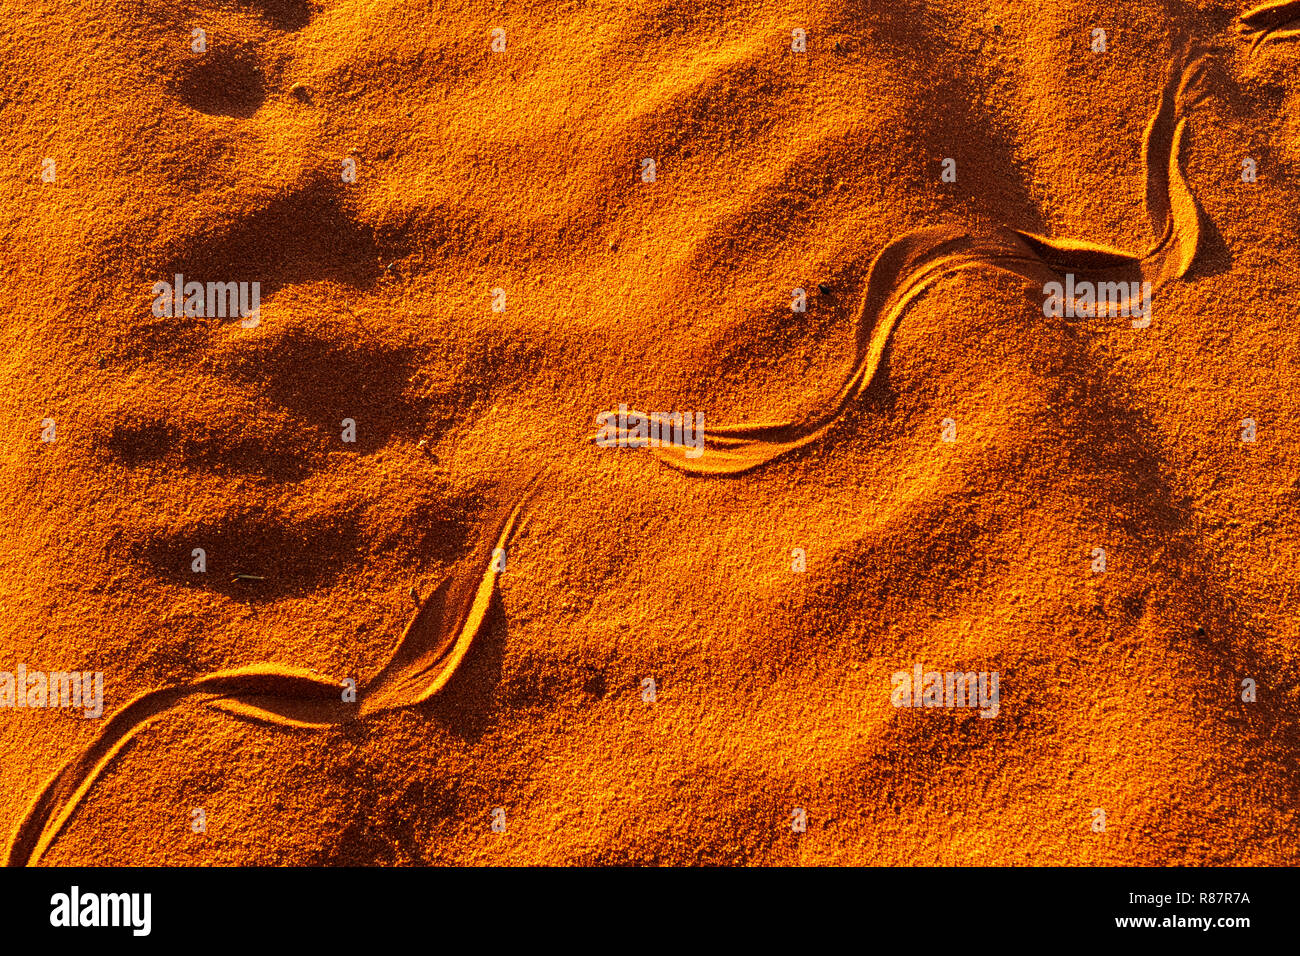 Snake track in the red sand of Australia's outback. Stock Photo